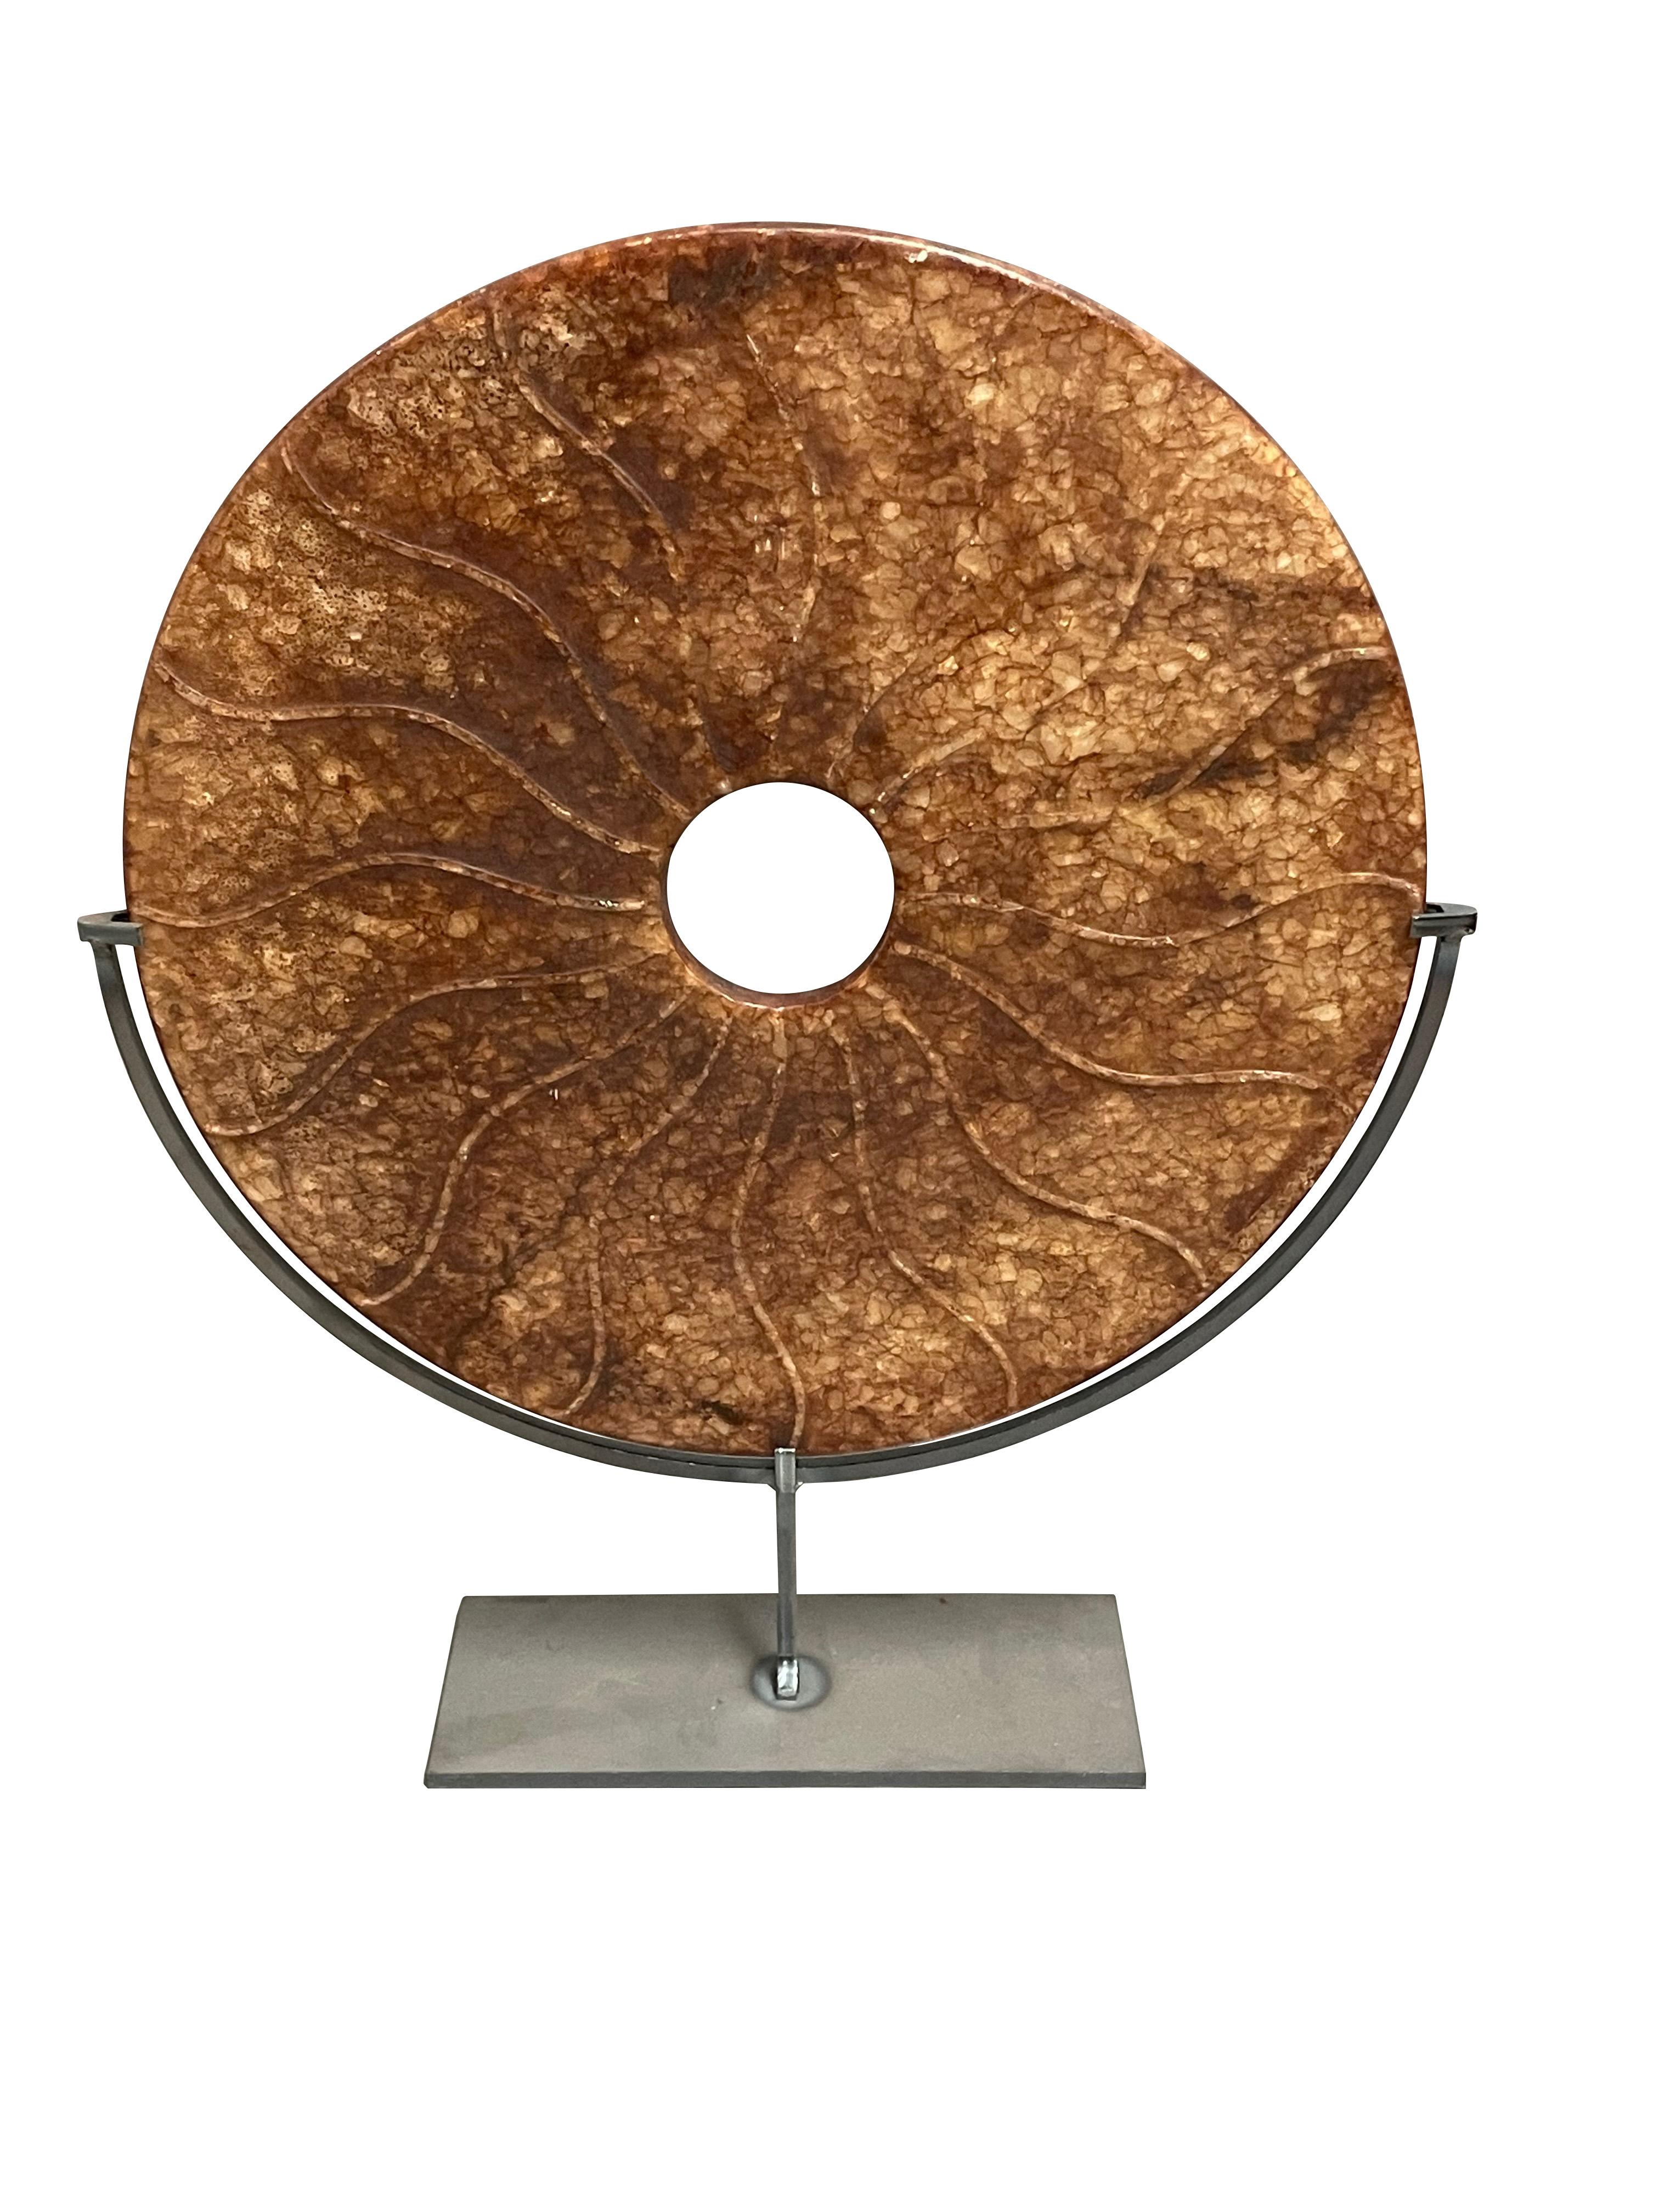 Contemporary Chinese set of three rust and gold colored jade discs.
Concentric circle design disc measures  9d  x  12h      
stand measures   7  x  3
Textured disc measures   12d  x  15h    
stand measures  7   x  3.5
Three handle disc measures    